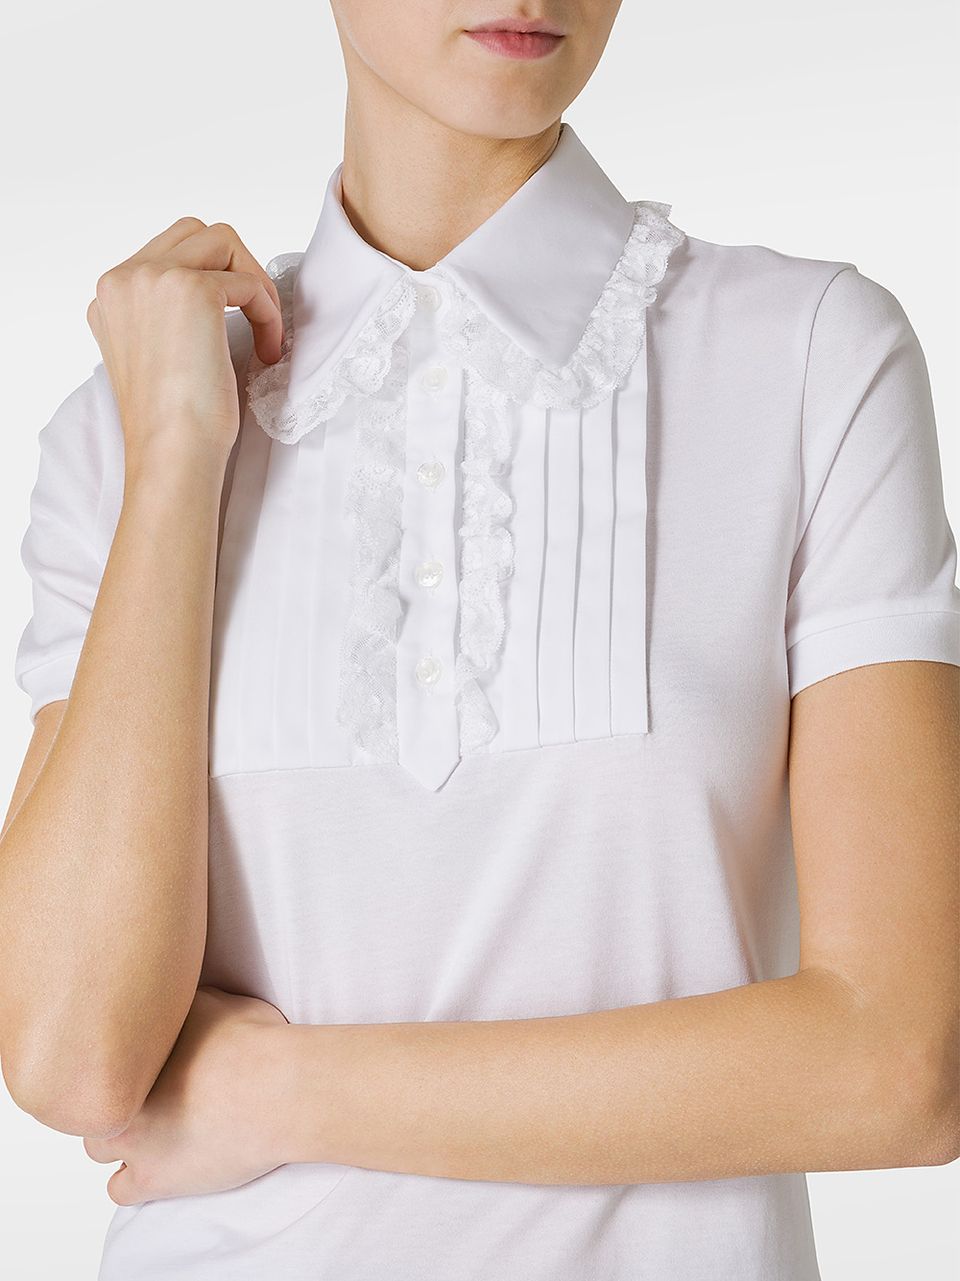 Cotton jersey polo shirt with ruffles